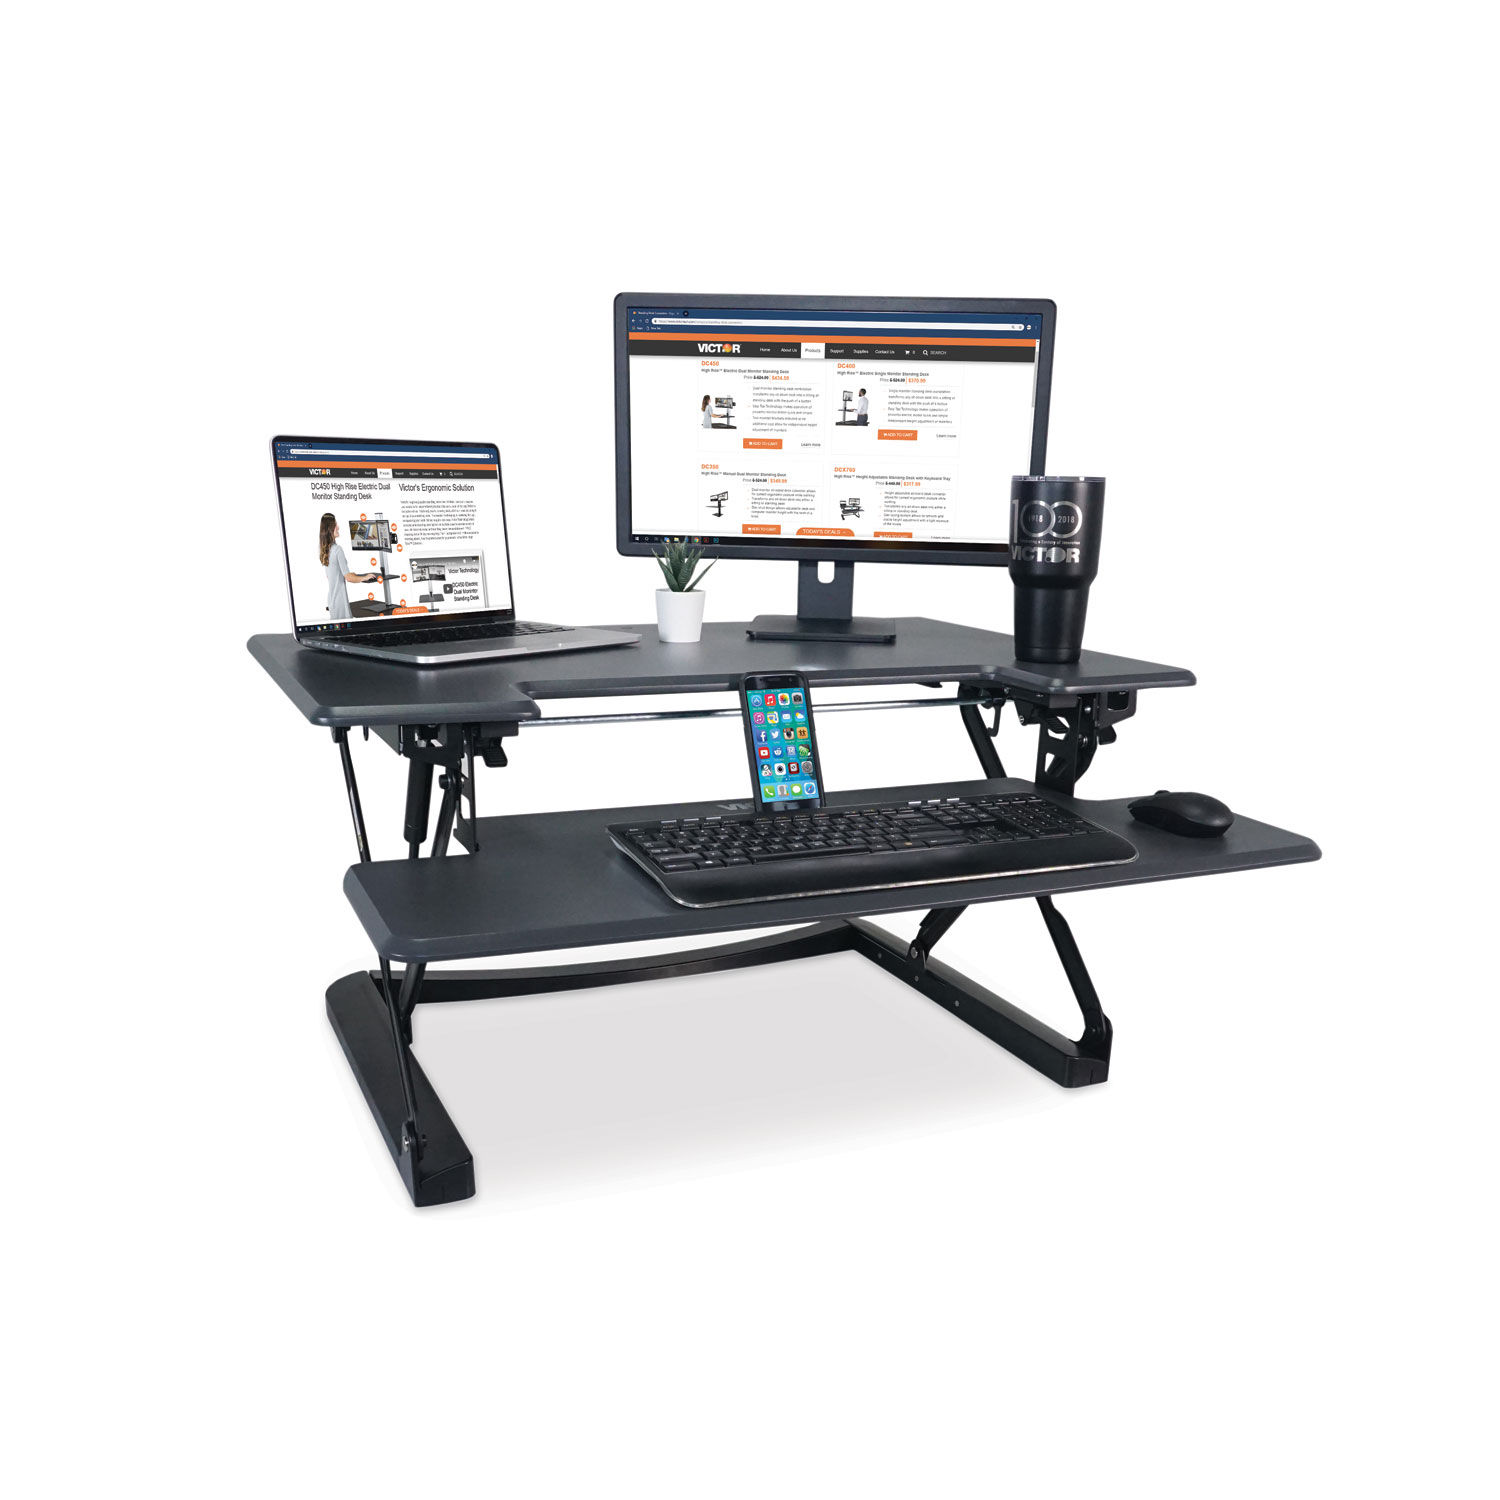 High Rise Height Adjustable Standing Desk with Keyboard Tray 36" x 31.25" x 5.25" to 20", Gray/Black